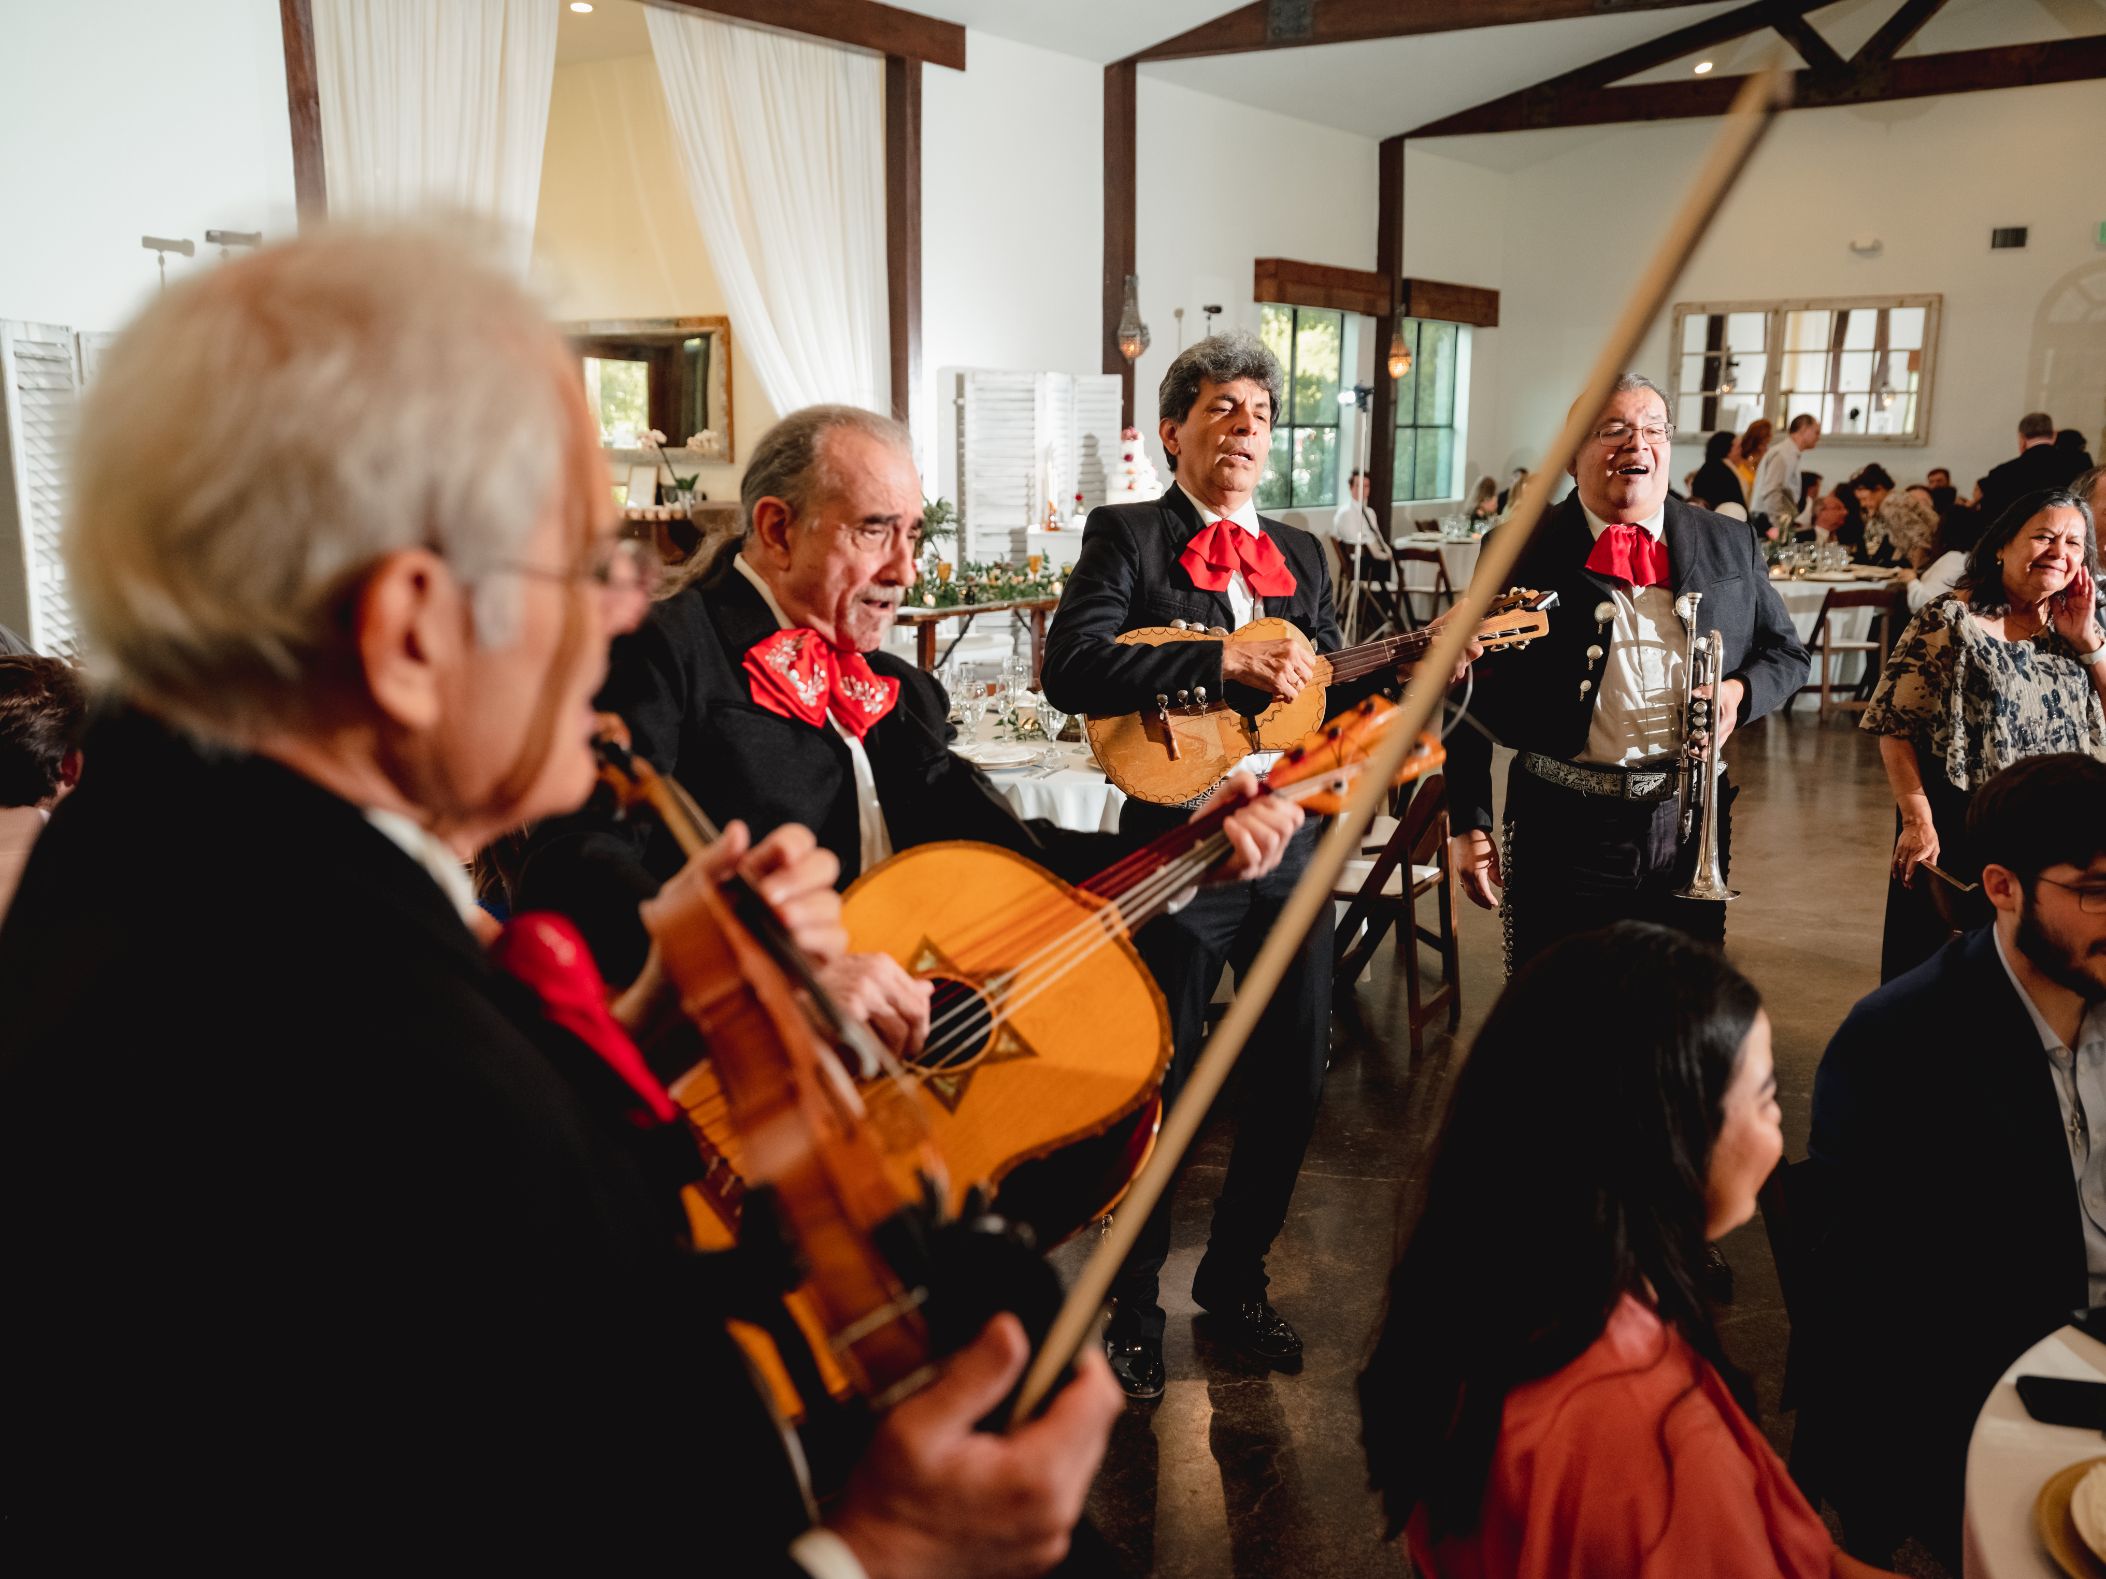 Mariachi band plays music during reception at Pecan Spring Ranch wedding venue in Austin, Texas. 